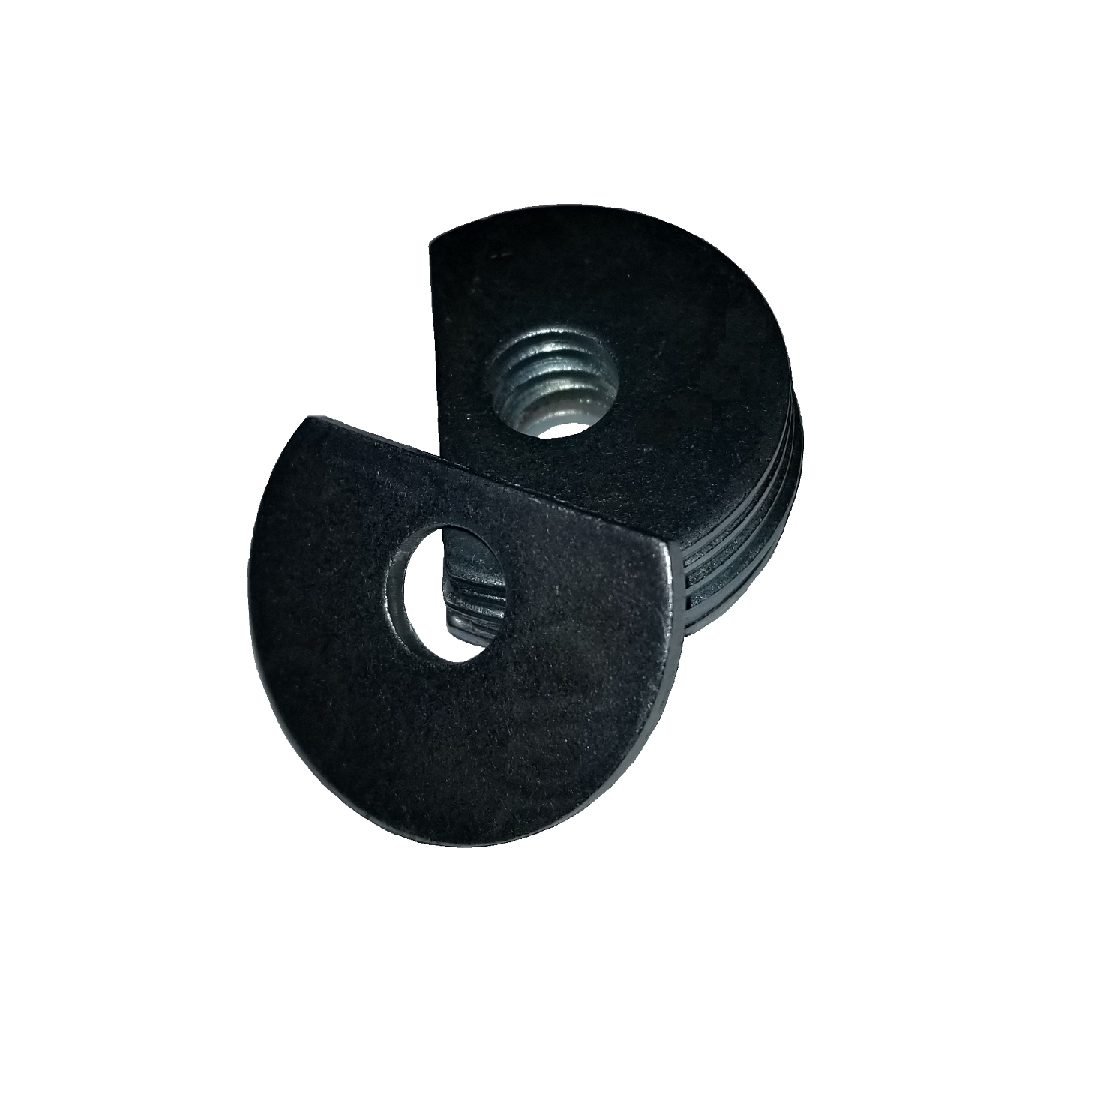 Clipped OD Washer - 1.050 ID, 3.250 OD, 0.215 Thick, Low Carbon Steel - Soft